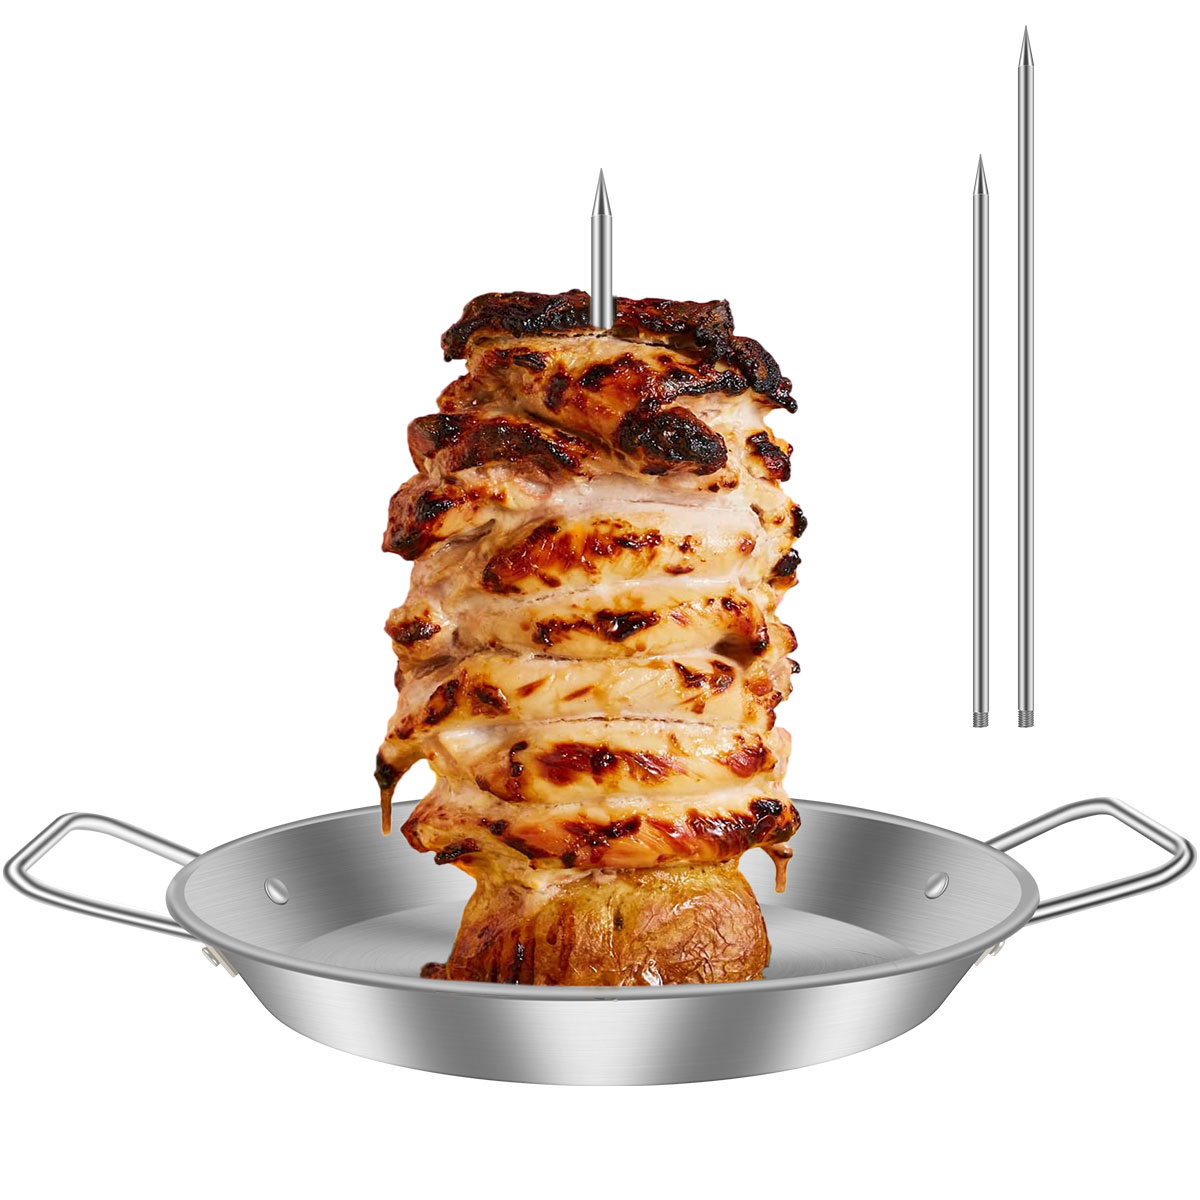 Lieonvis Vertical Meat Skewer Stainless Steel BBQ Vertical Skewer Grill with 3 Replacement Spikes Barbecue Vertical Skewer Grill Rack Stand with Handle for Whole Chicken Fish Sausage Steak - image 1 of 10